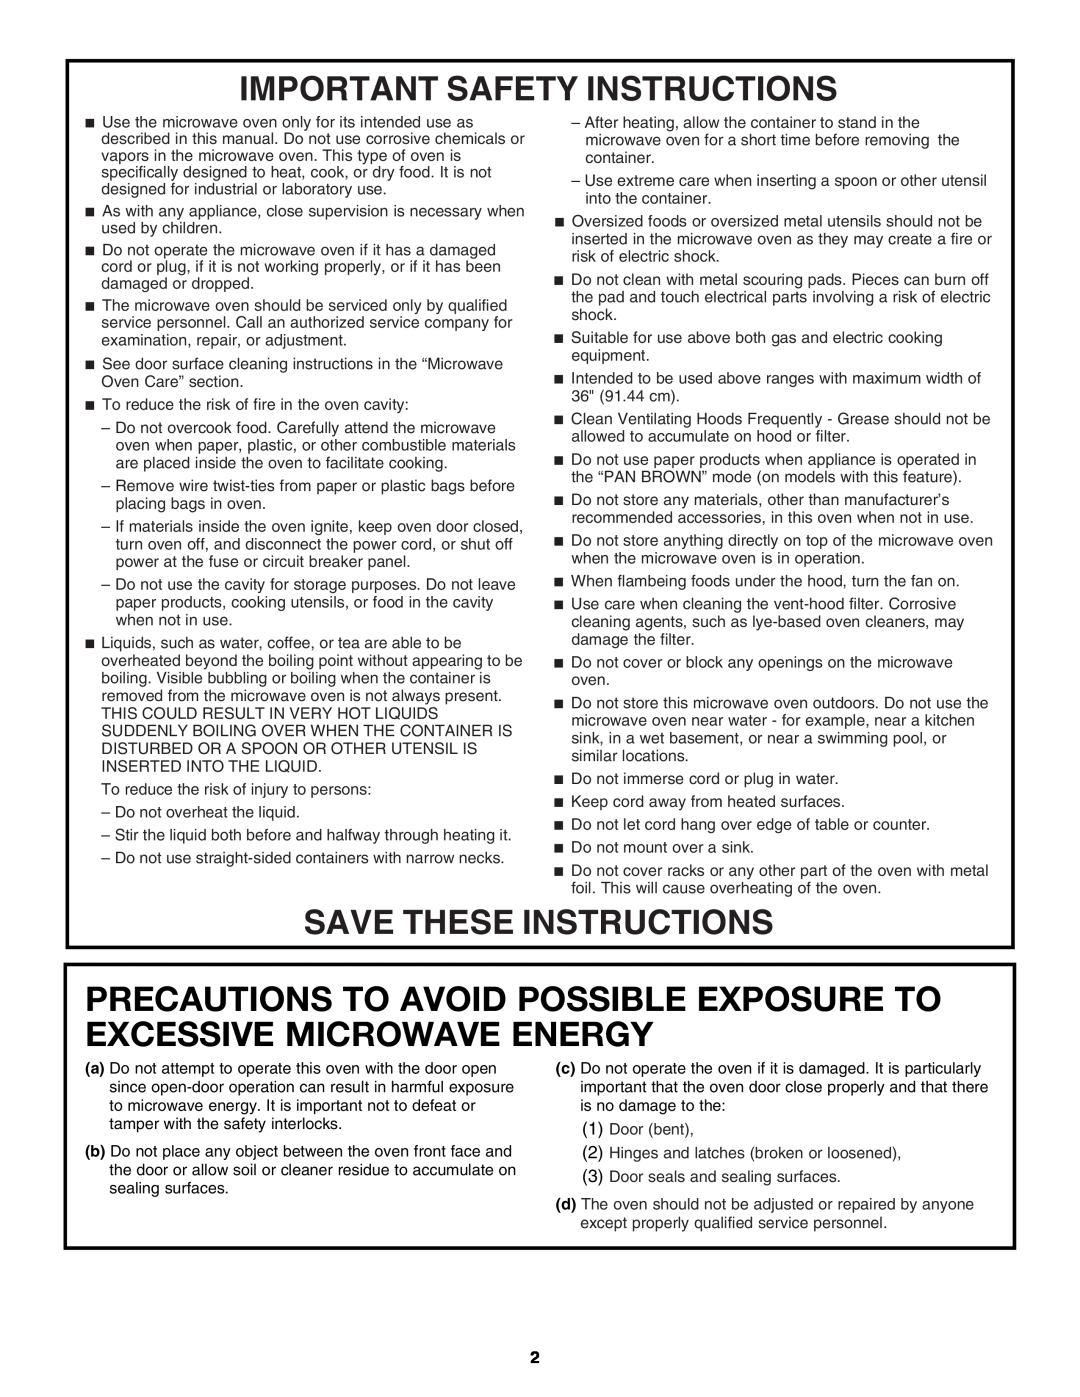 Whirlpool W10170440A Precautions To Avoid Possible Exposure To Excessive Microwave Energy, Important Safety Instructions 